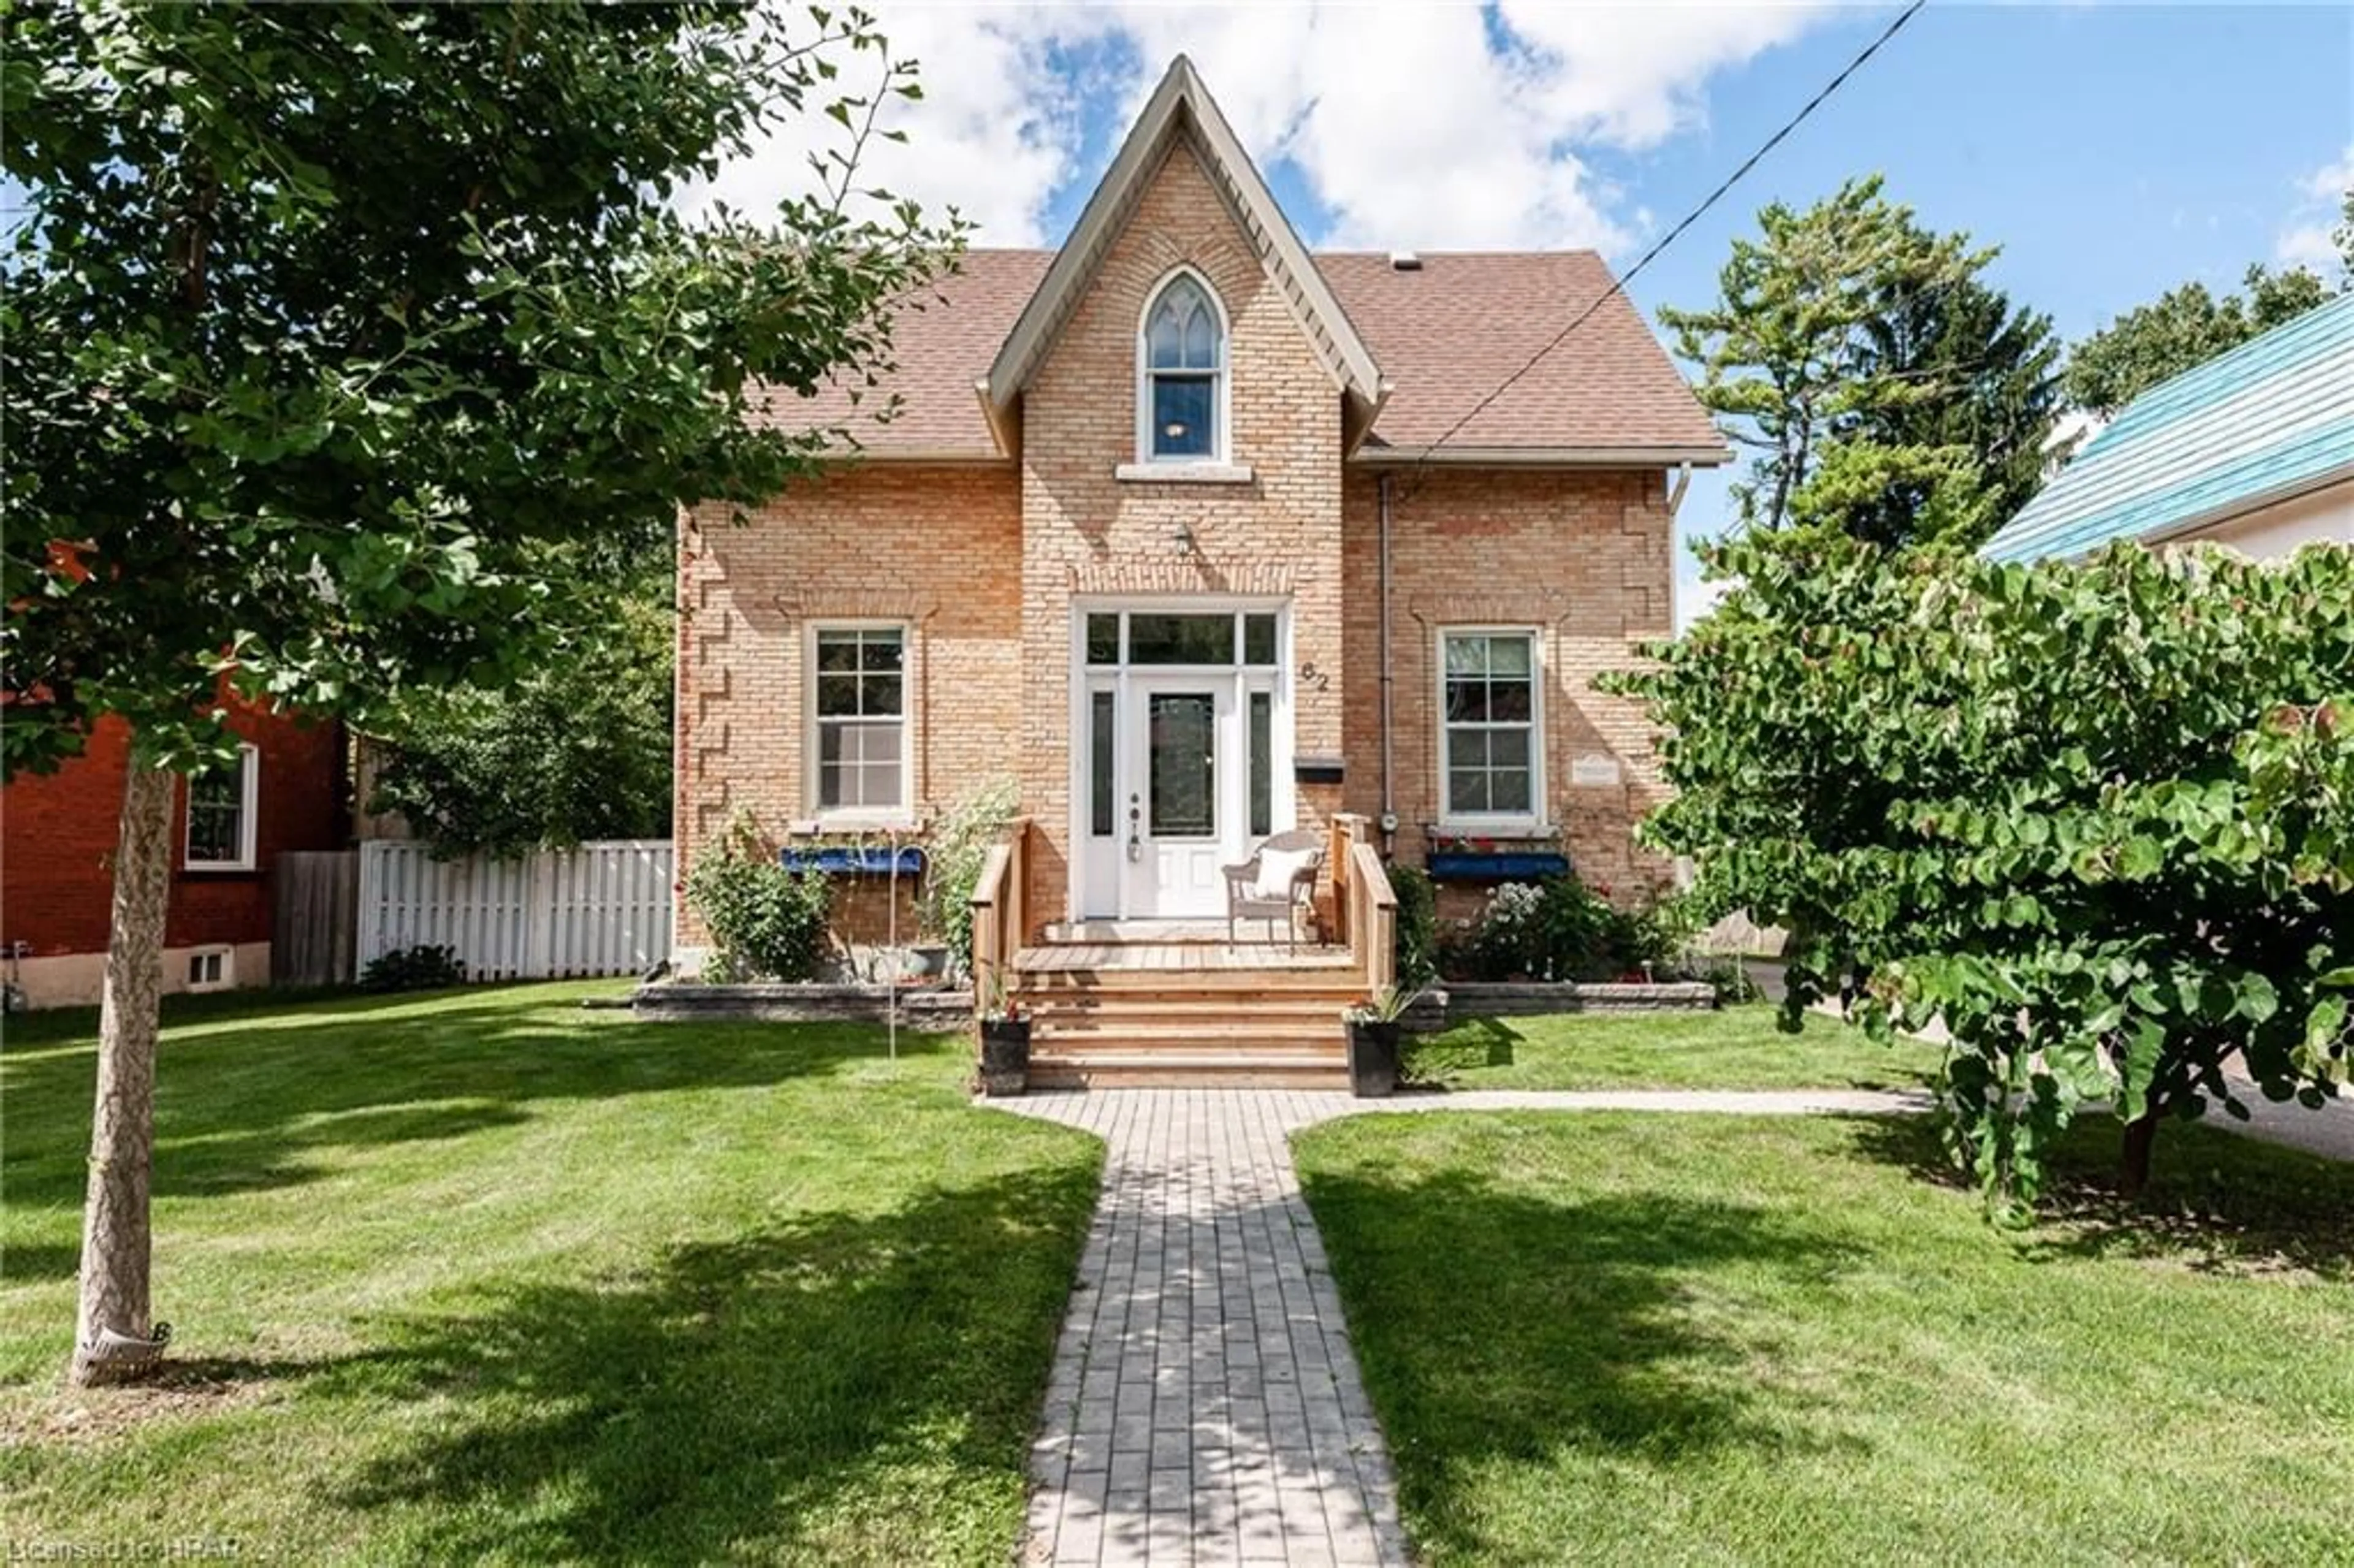 Home with brick exterior material for 62 Falstaff St, Stratford Ontario N5A 3T3